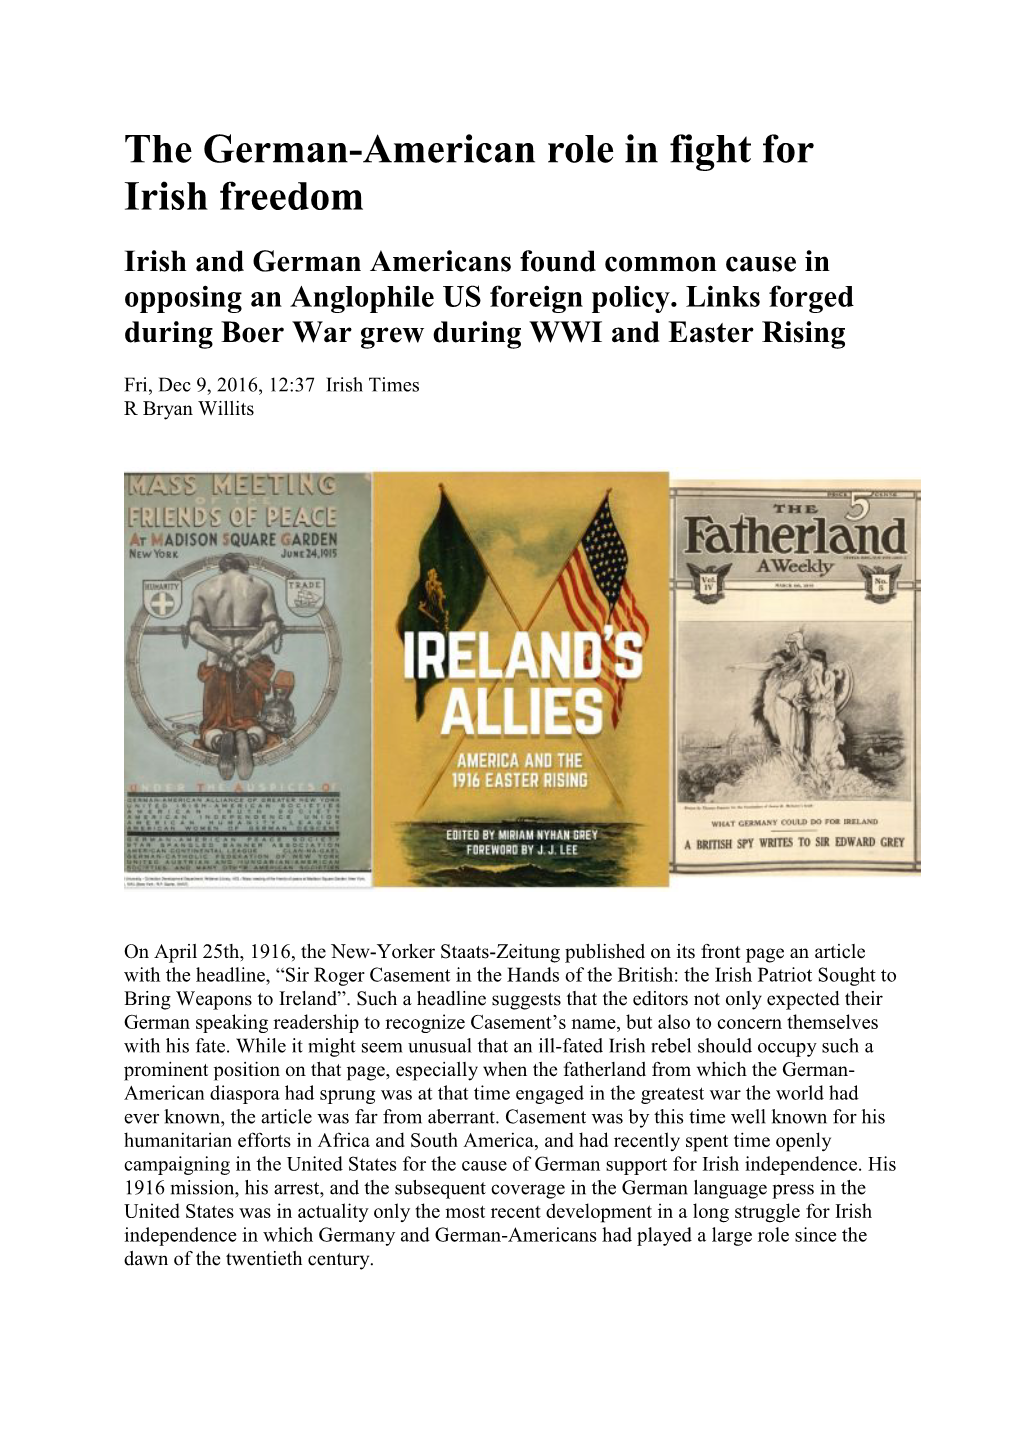 The German-American Role in Fight for Irish Freedom Irish and German Americans Found Common Cause in Opposing an Anglophile US Foreign Policy